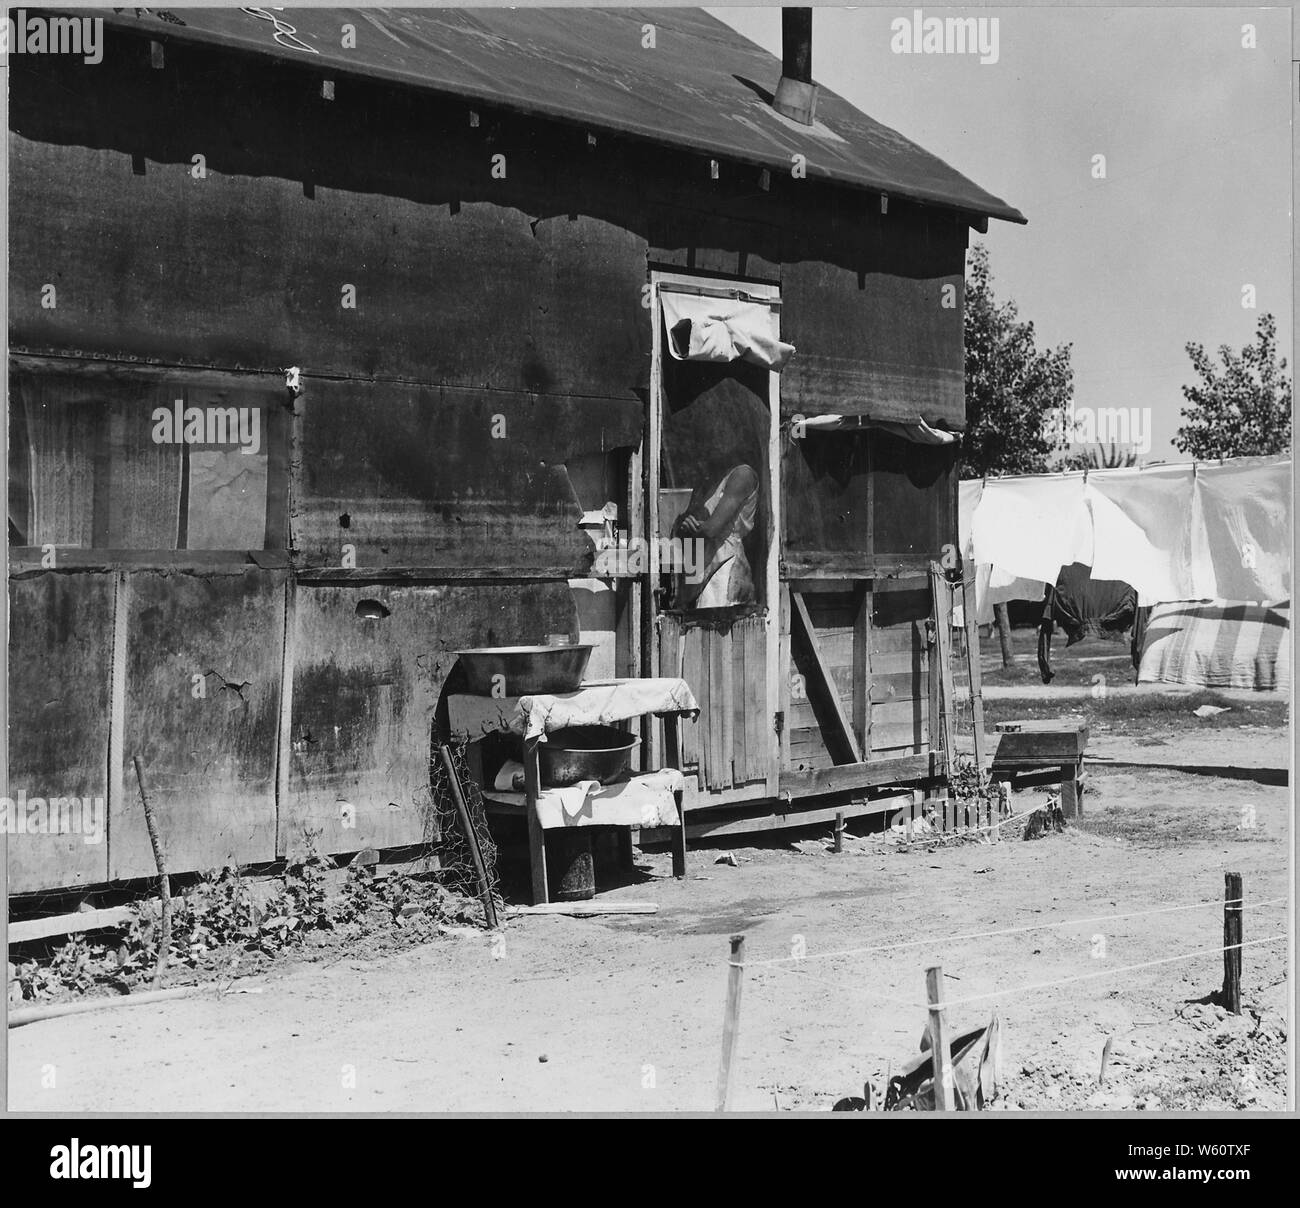 Arvin, Kern County, California. One in a community of shacks in subdivided orchard rented to agricul . . .; Scope and content:  Full caption reads as follows: Arvin, Kern County, California. One in a community of shacks in subdivided orchard rented to agricultural workers as permanent homes. Workers on and off relief. Shacks rent from $7 to $12 per month. No running water. Stock Photo